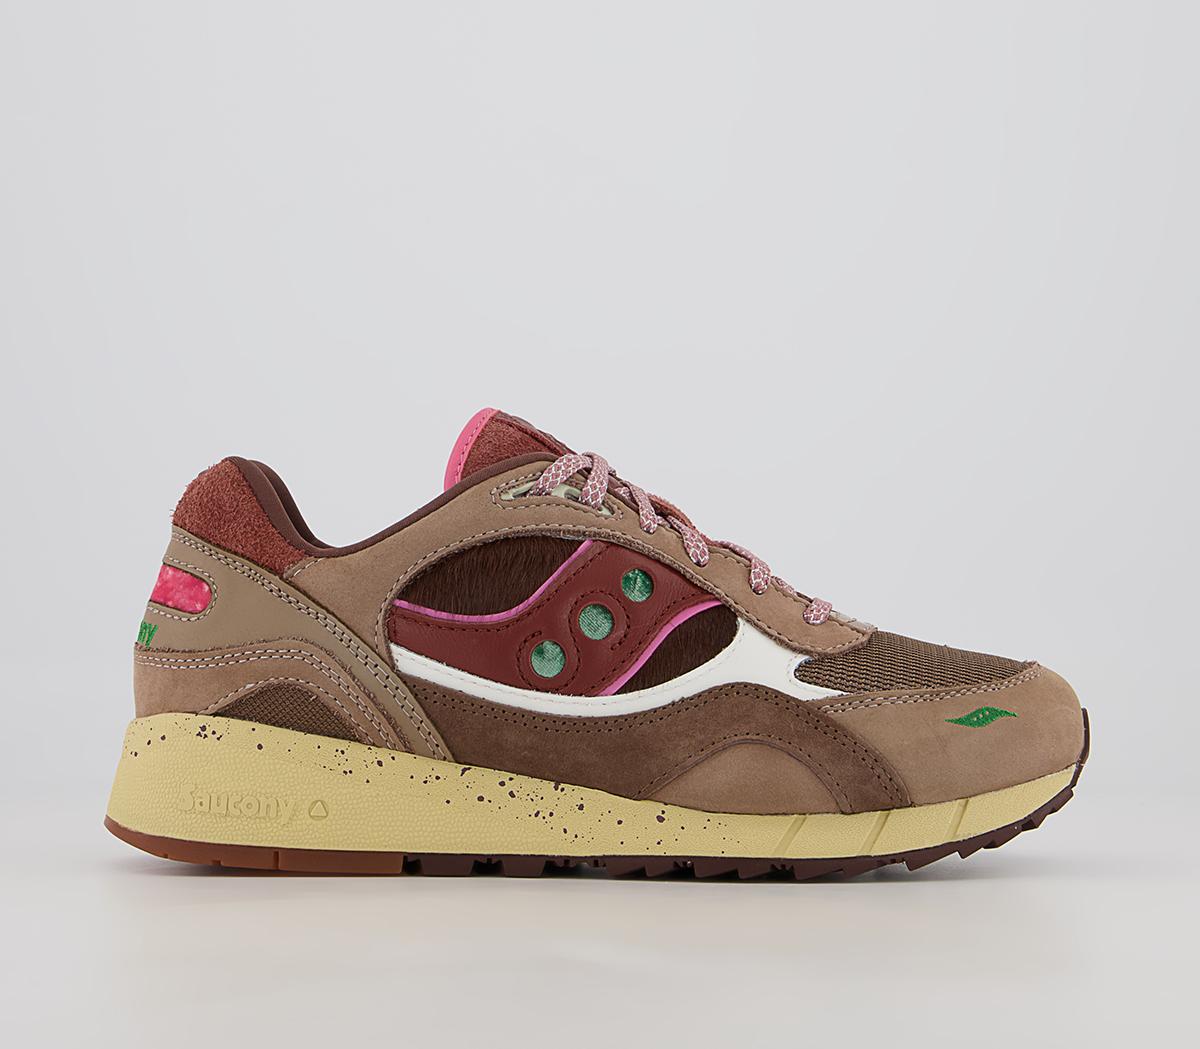 SauconyShadow 6000 TrainersFeature Brown